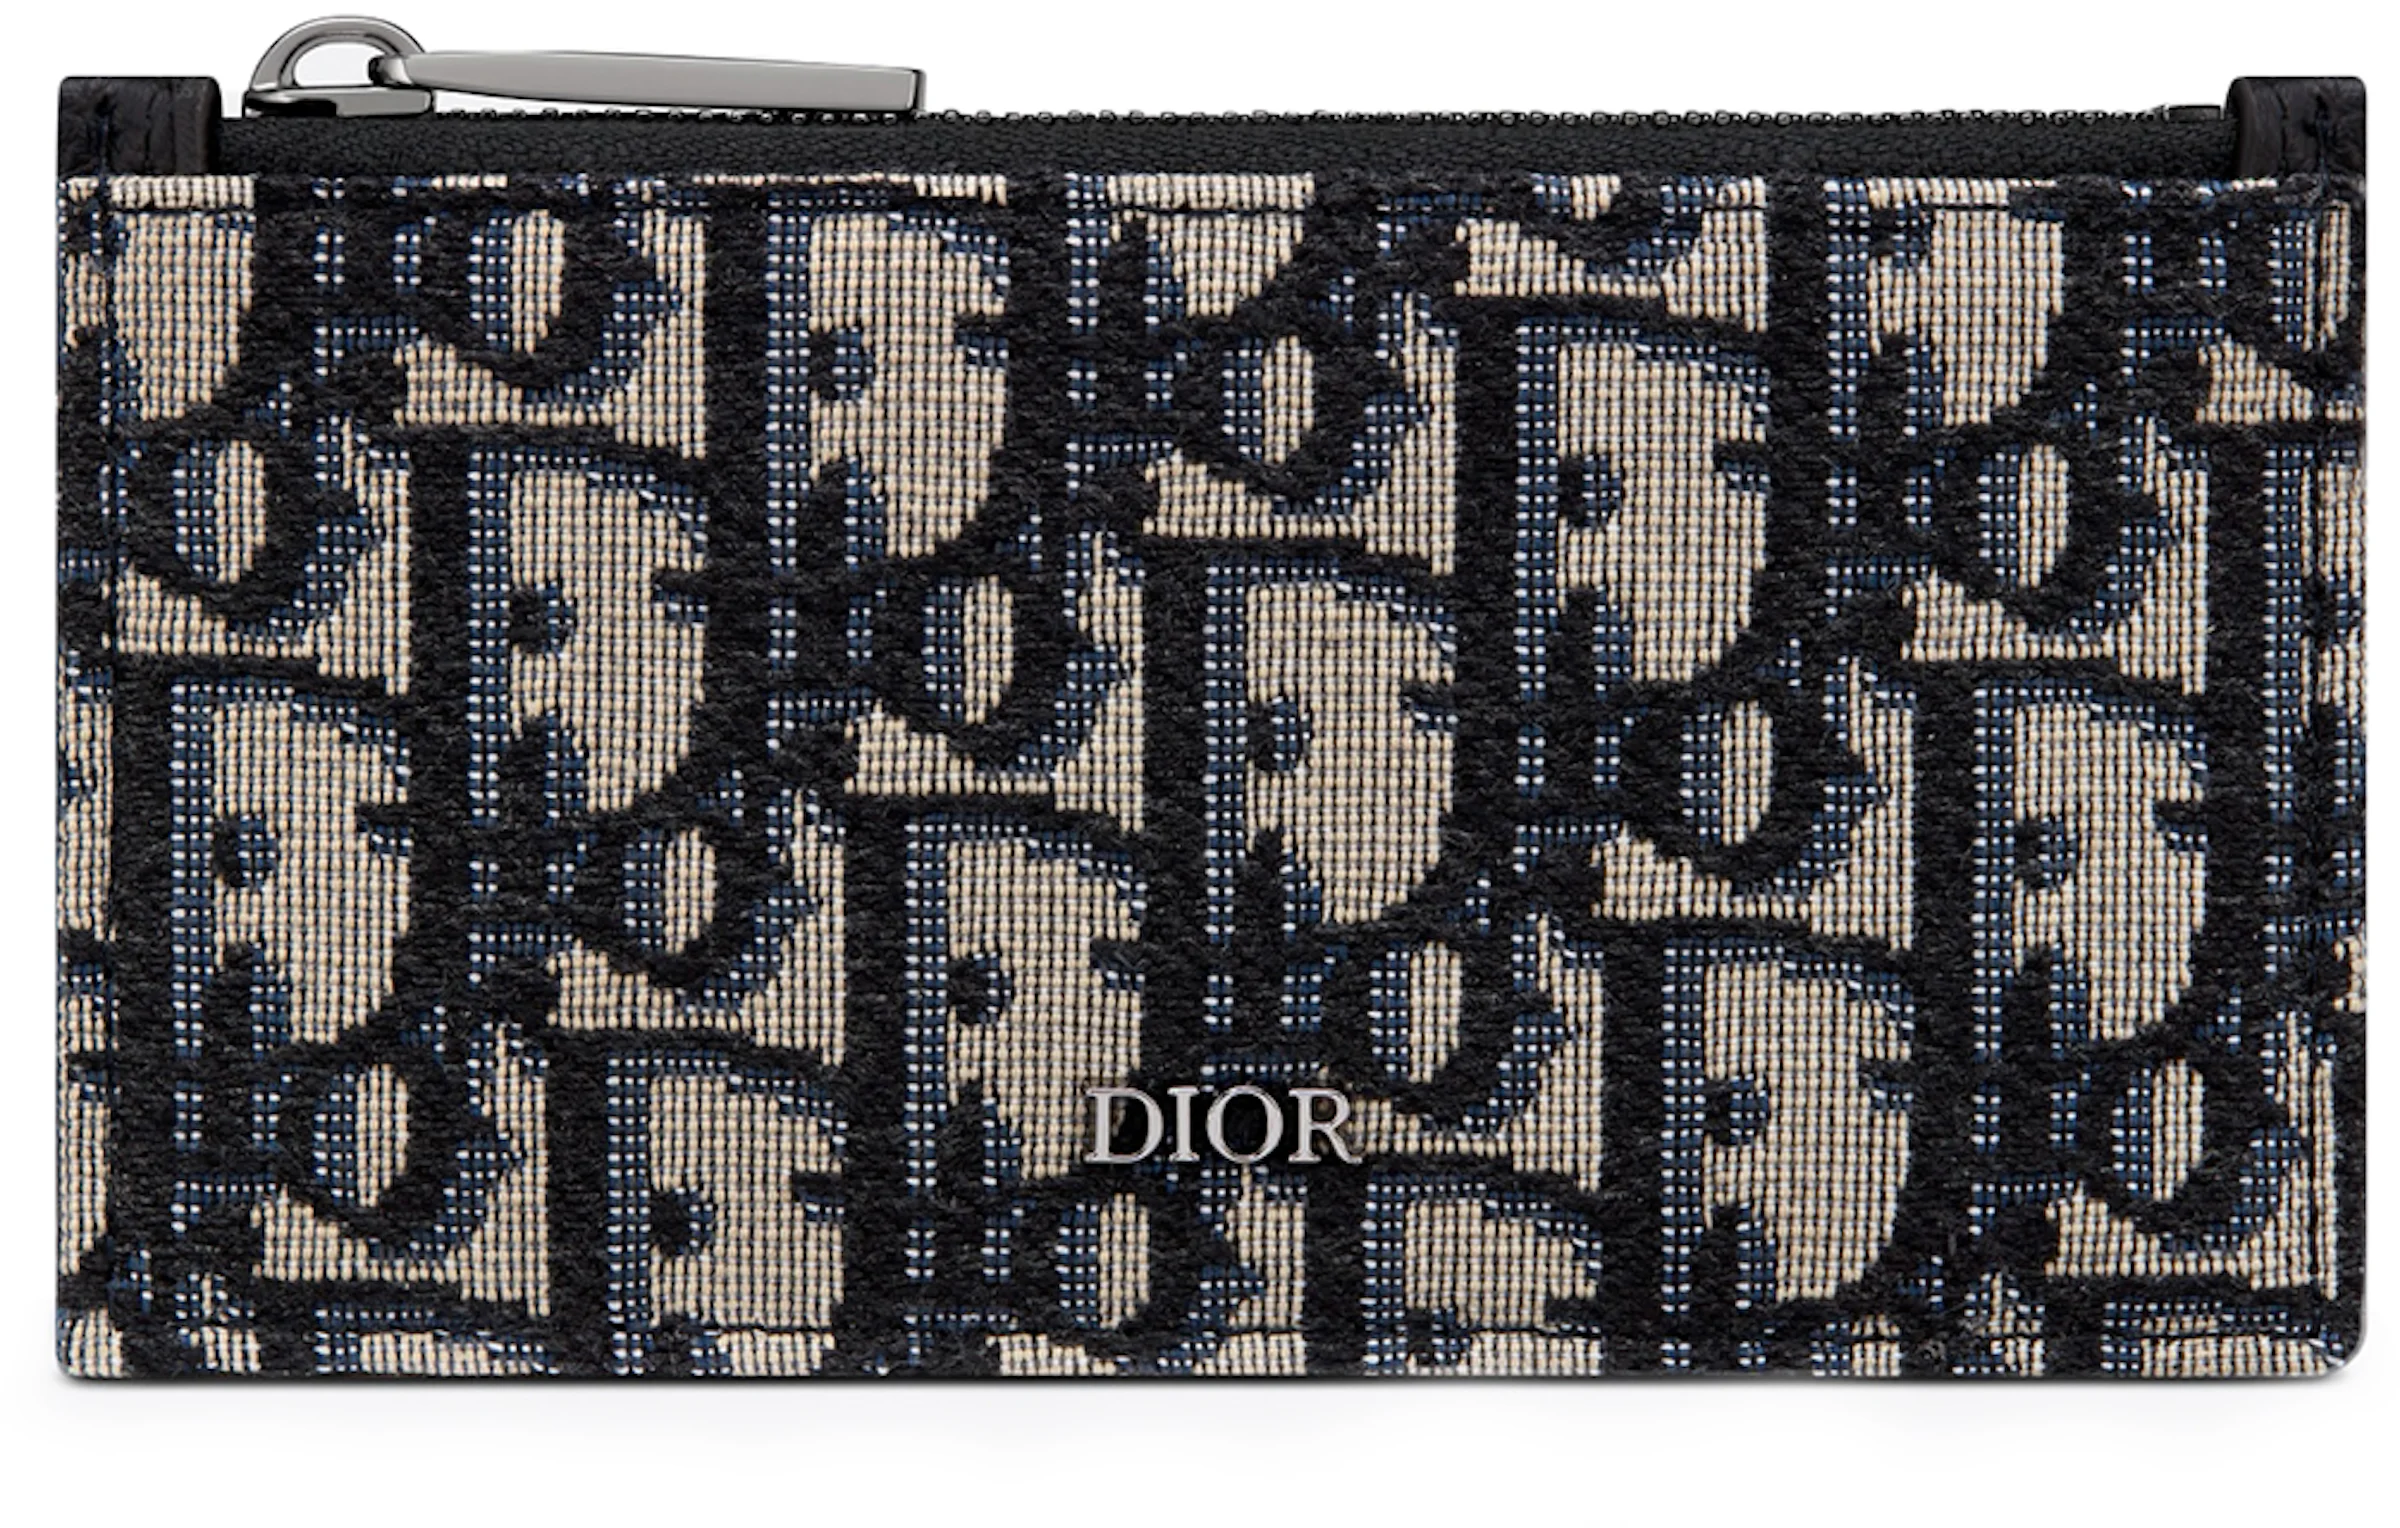 Zipped Card Holder Black Dior Oblique Galaxy Leather